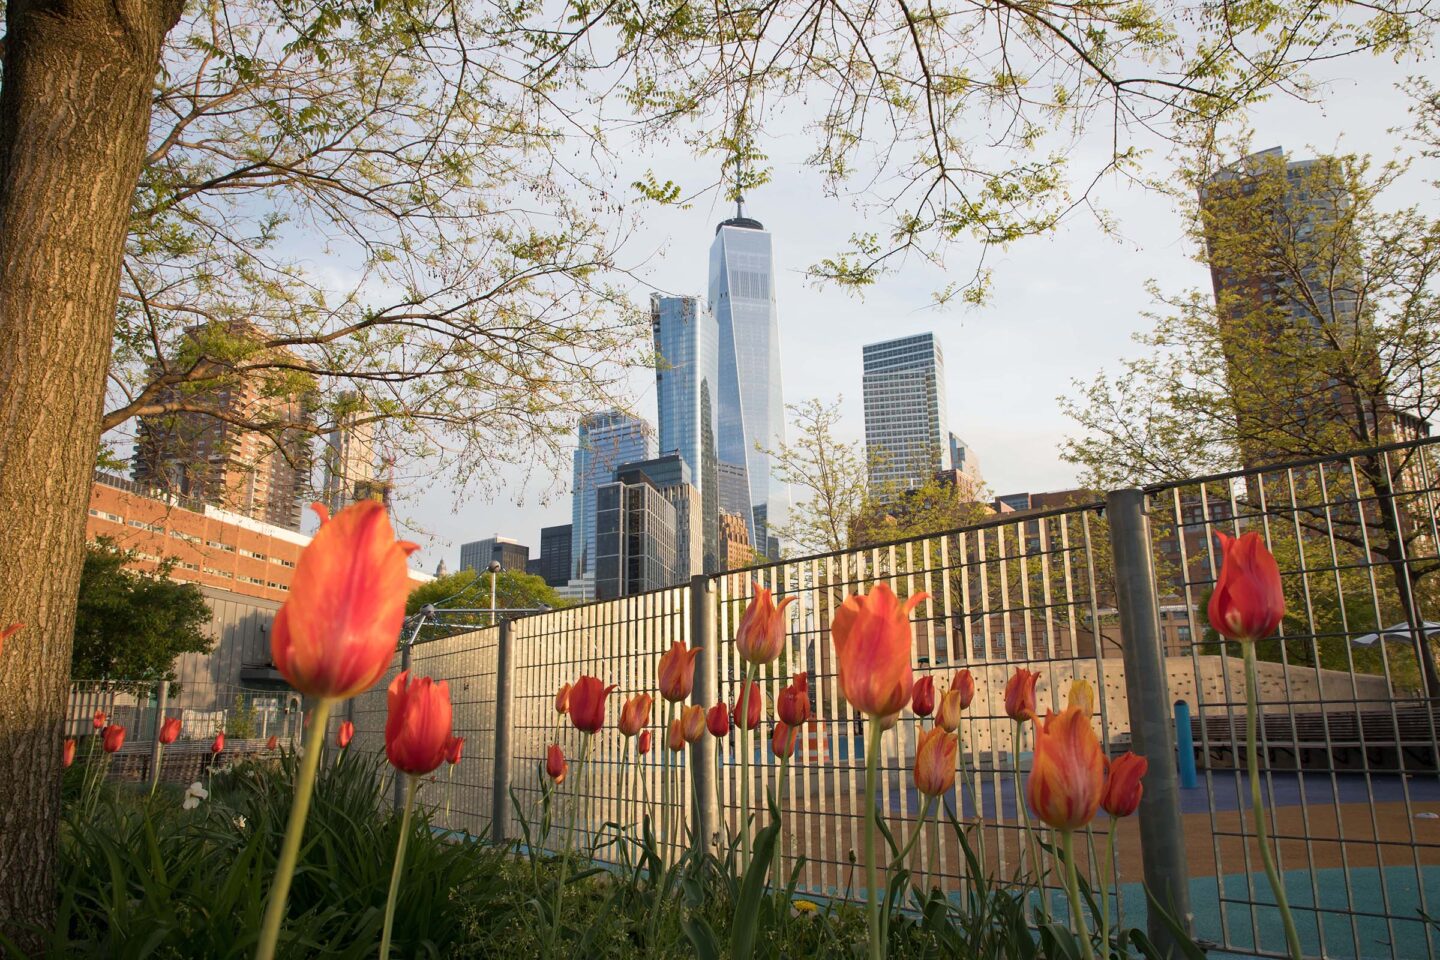 Orange tulips stare up towards the sky with Greenwich Village in the background